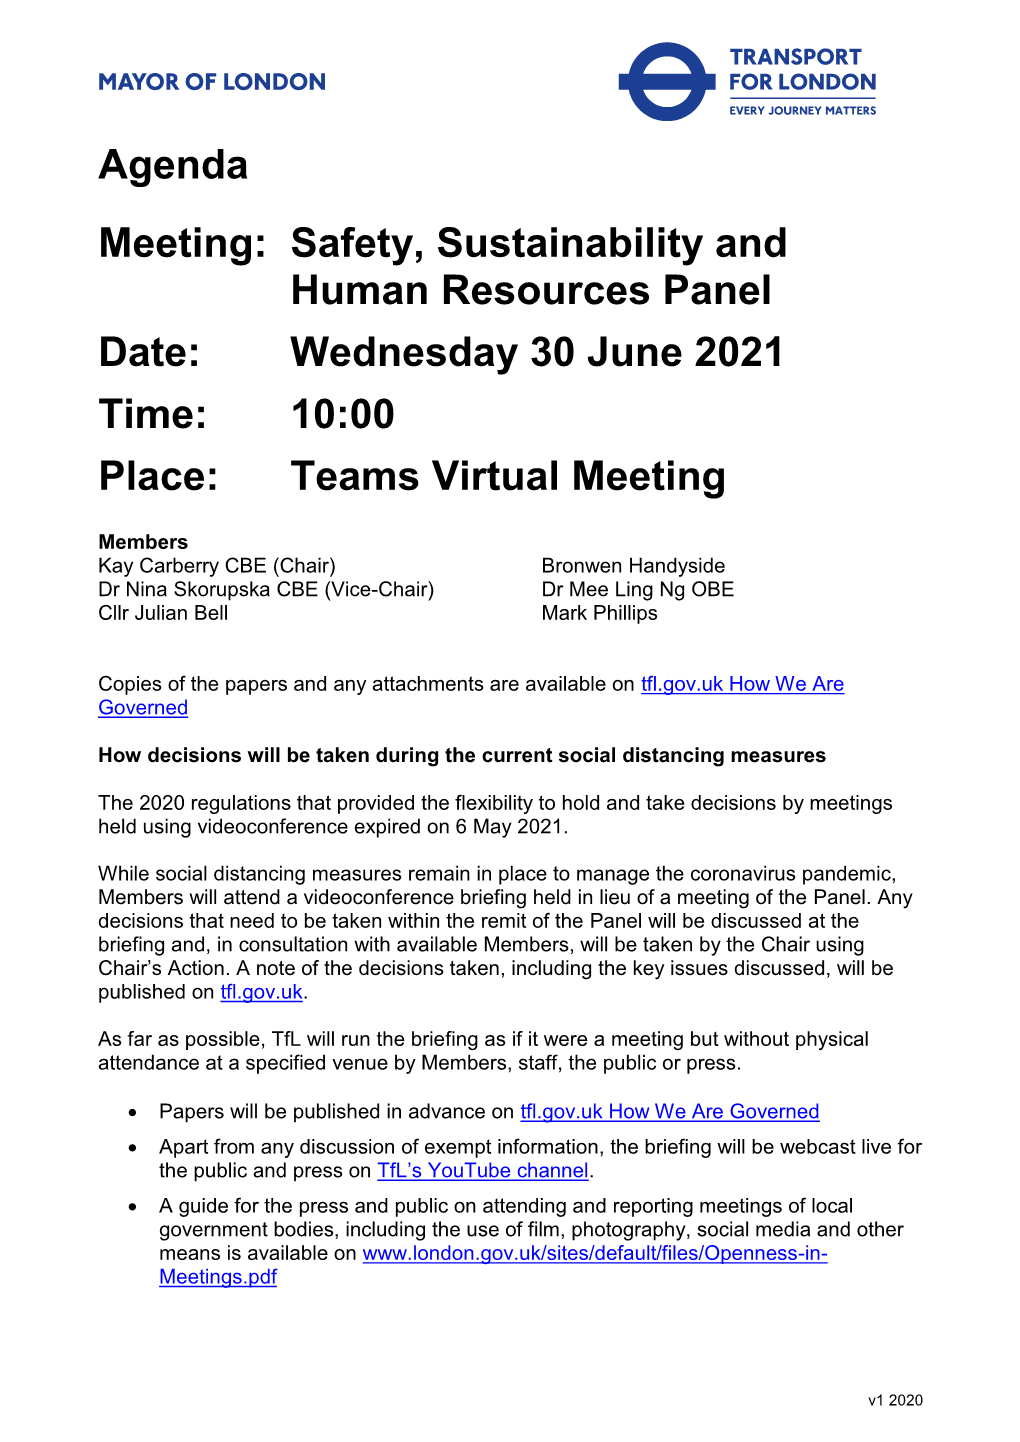 SSHR Panel Agenda and Papers 30 June 2021